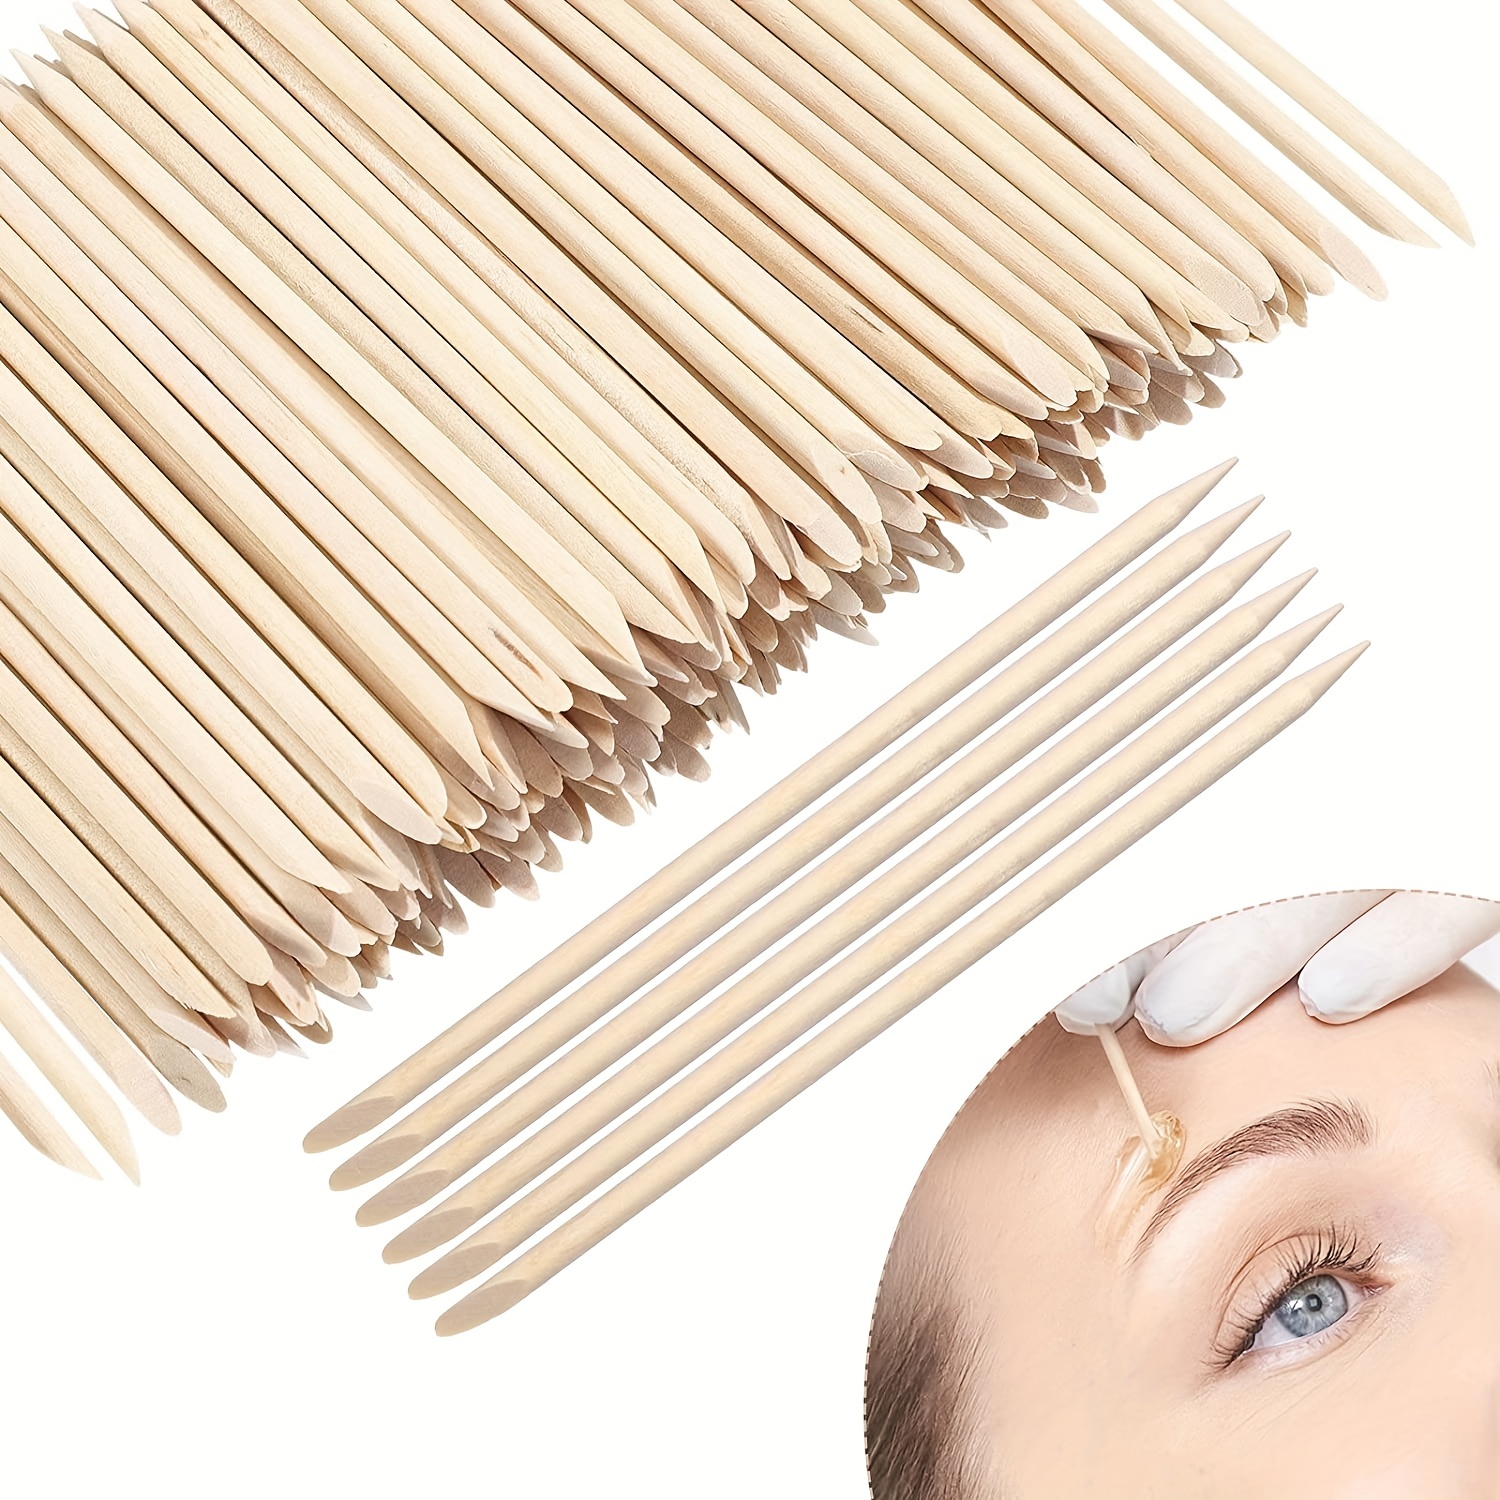 Wooden Wax Sticks - Eyebrow, Lip, Nose Small Waxing Applicator Sticks for  Hair Removal and Smooth Skin - Spa and Home Usage 200.